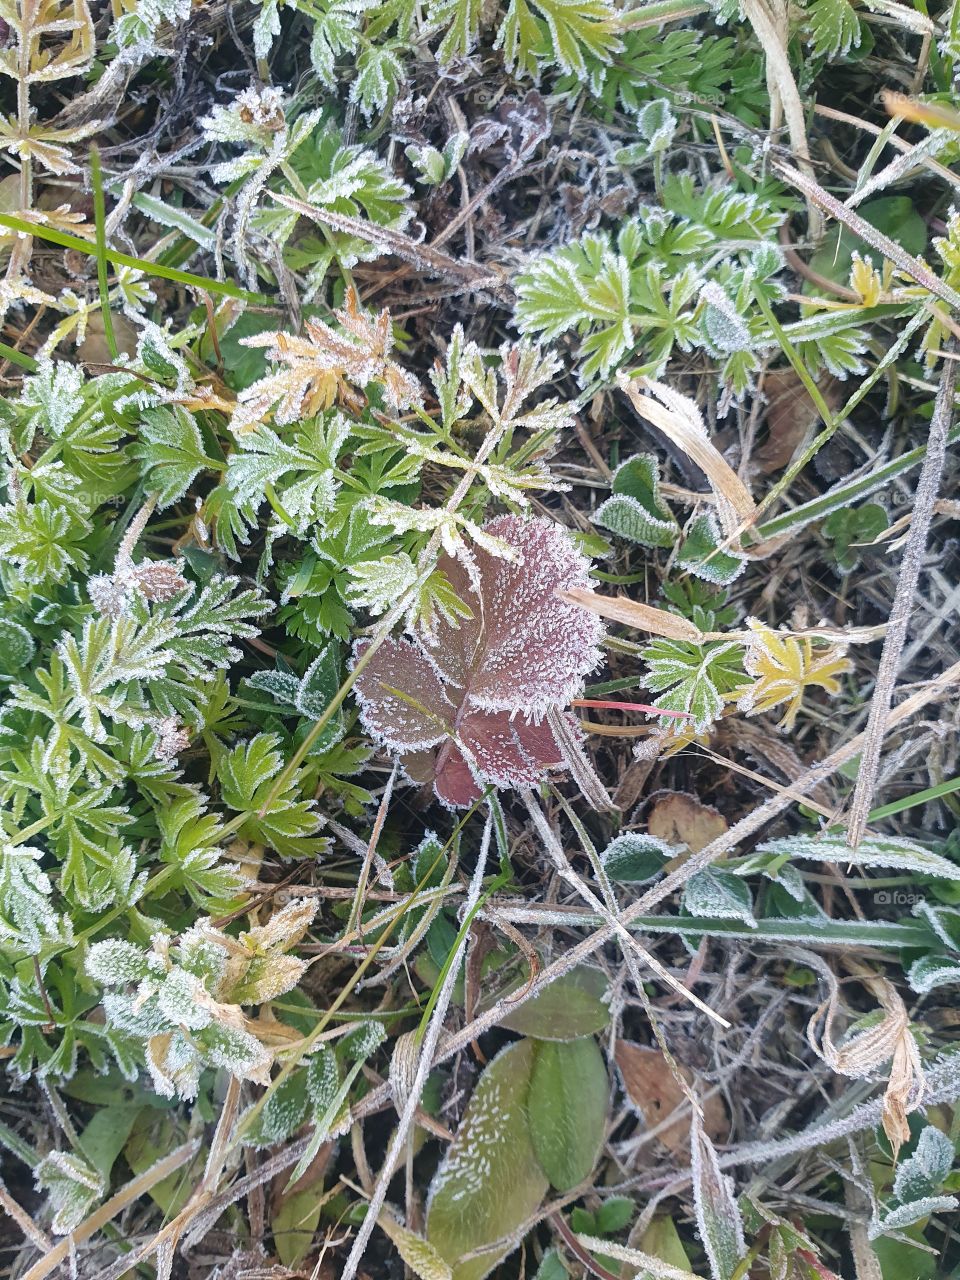 Plants covered in hoarfrost in autumn